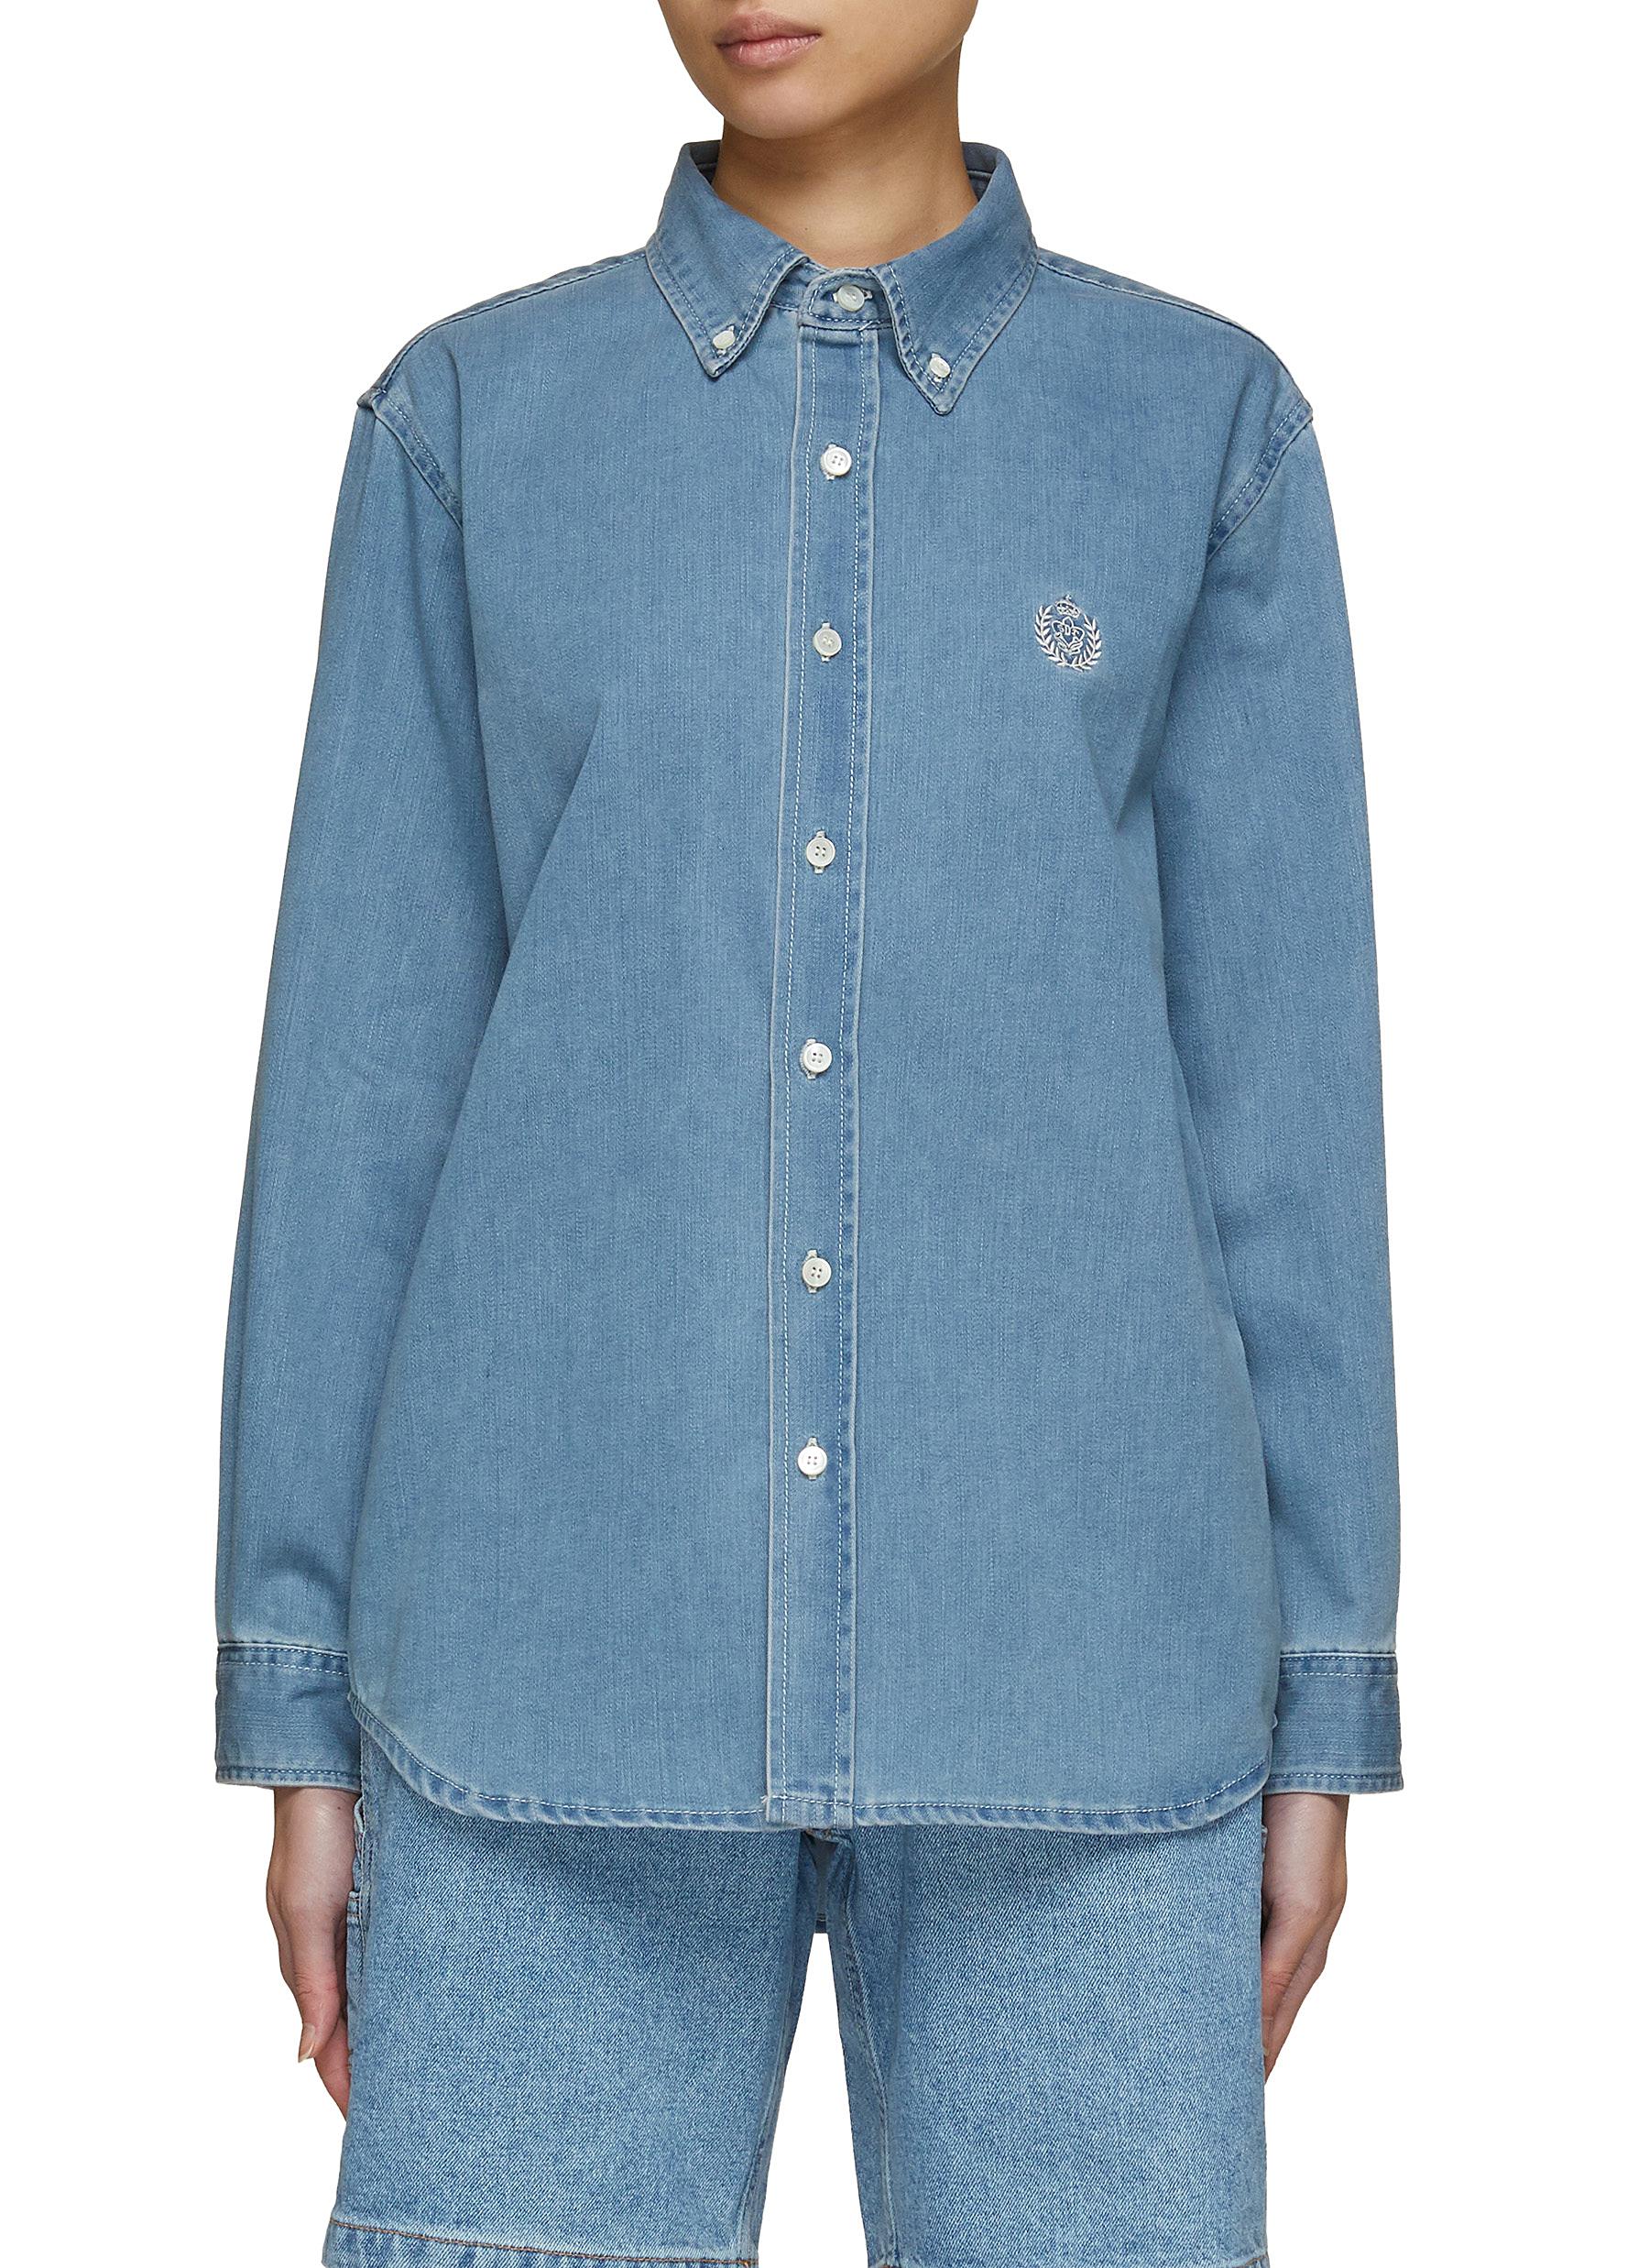 ONLY Shirt Dress 'Chicago' in Blue Denim | ABOUT YOU